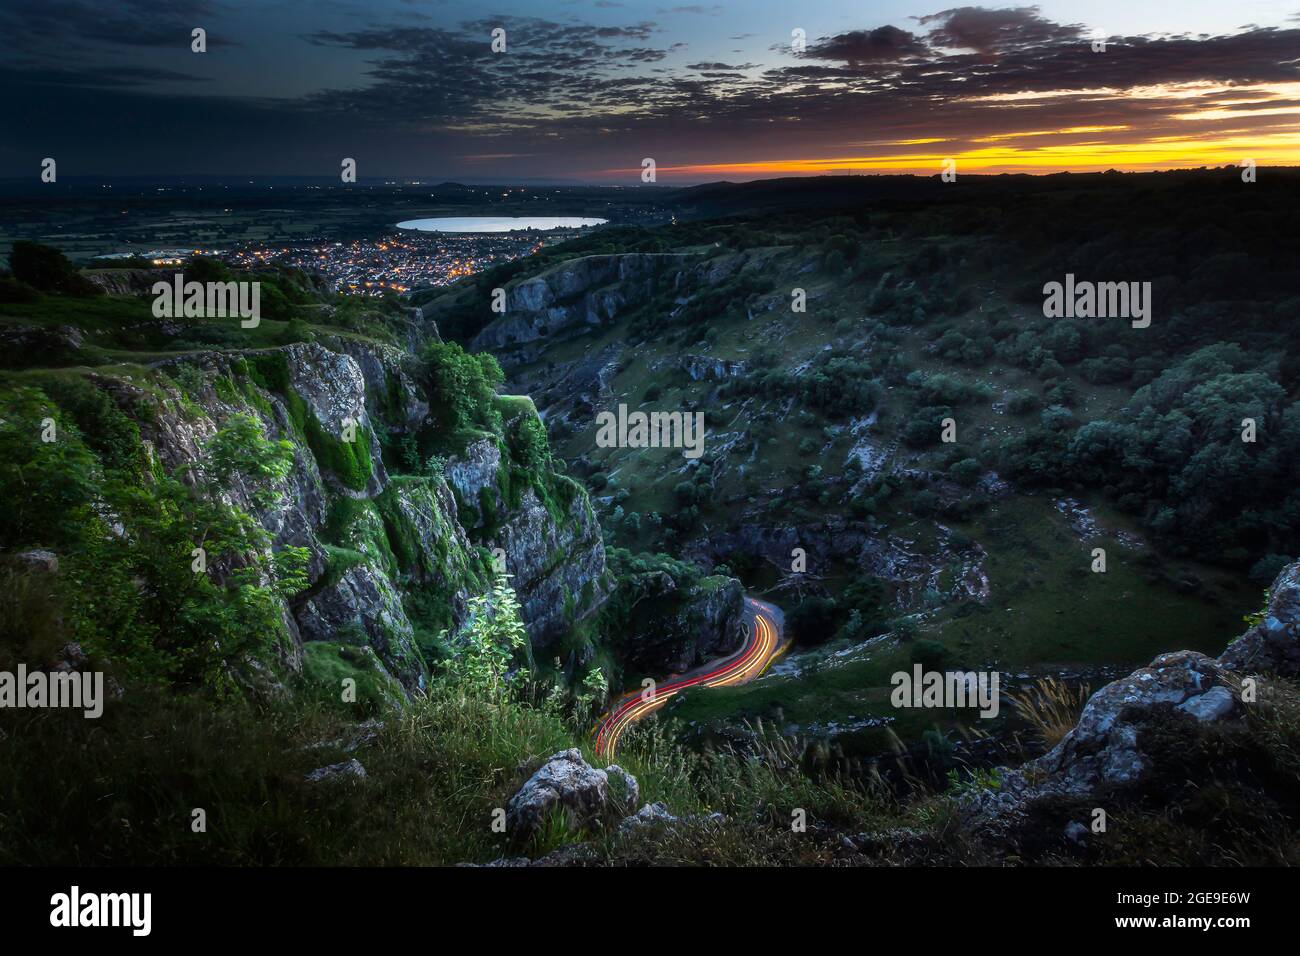 Evening in Cheddar gorge, Somerset, UK.Blue hour landscape scenery with orange afterglow on cloudy sky, car light trials and city lights in background Stock Photo